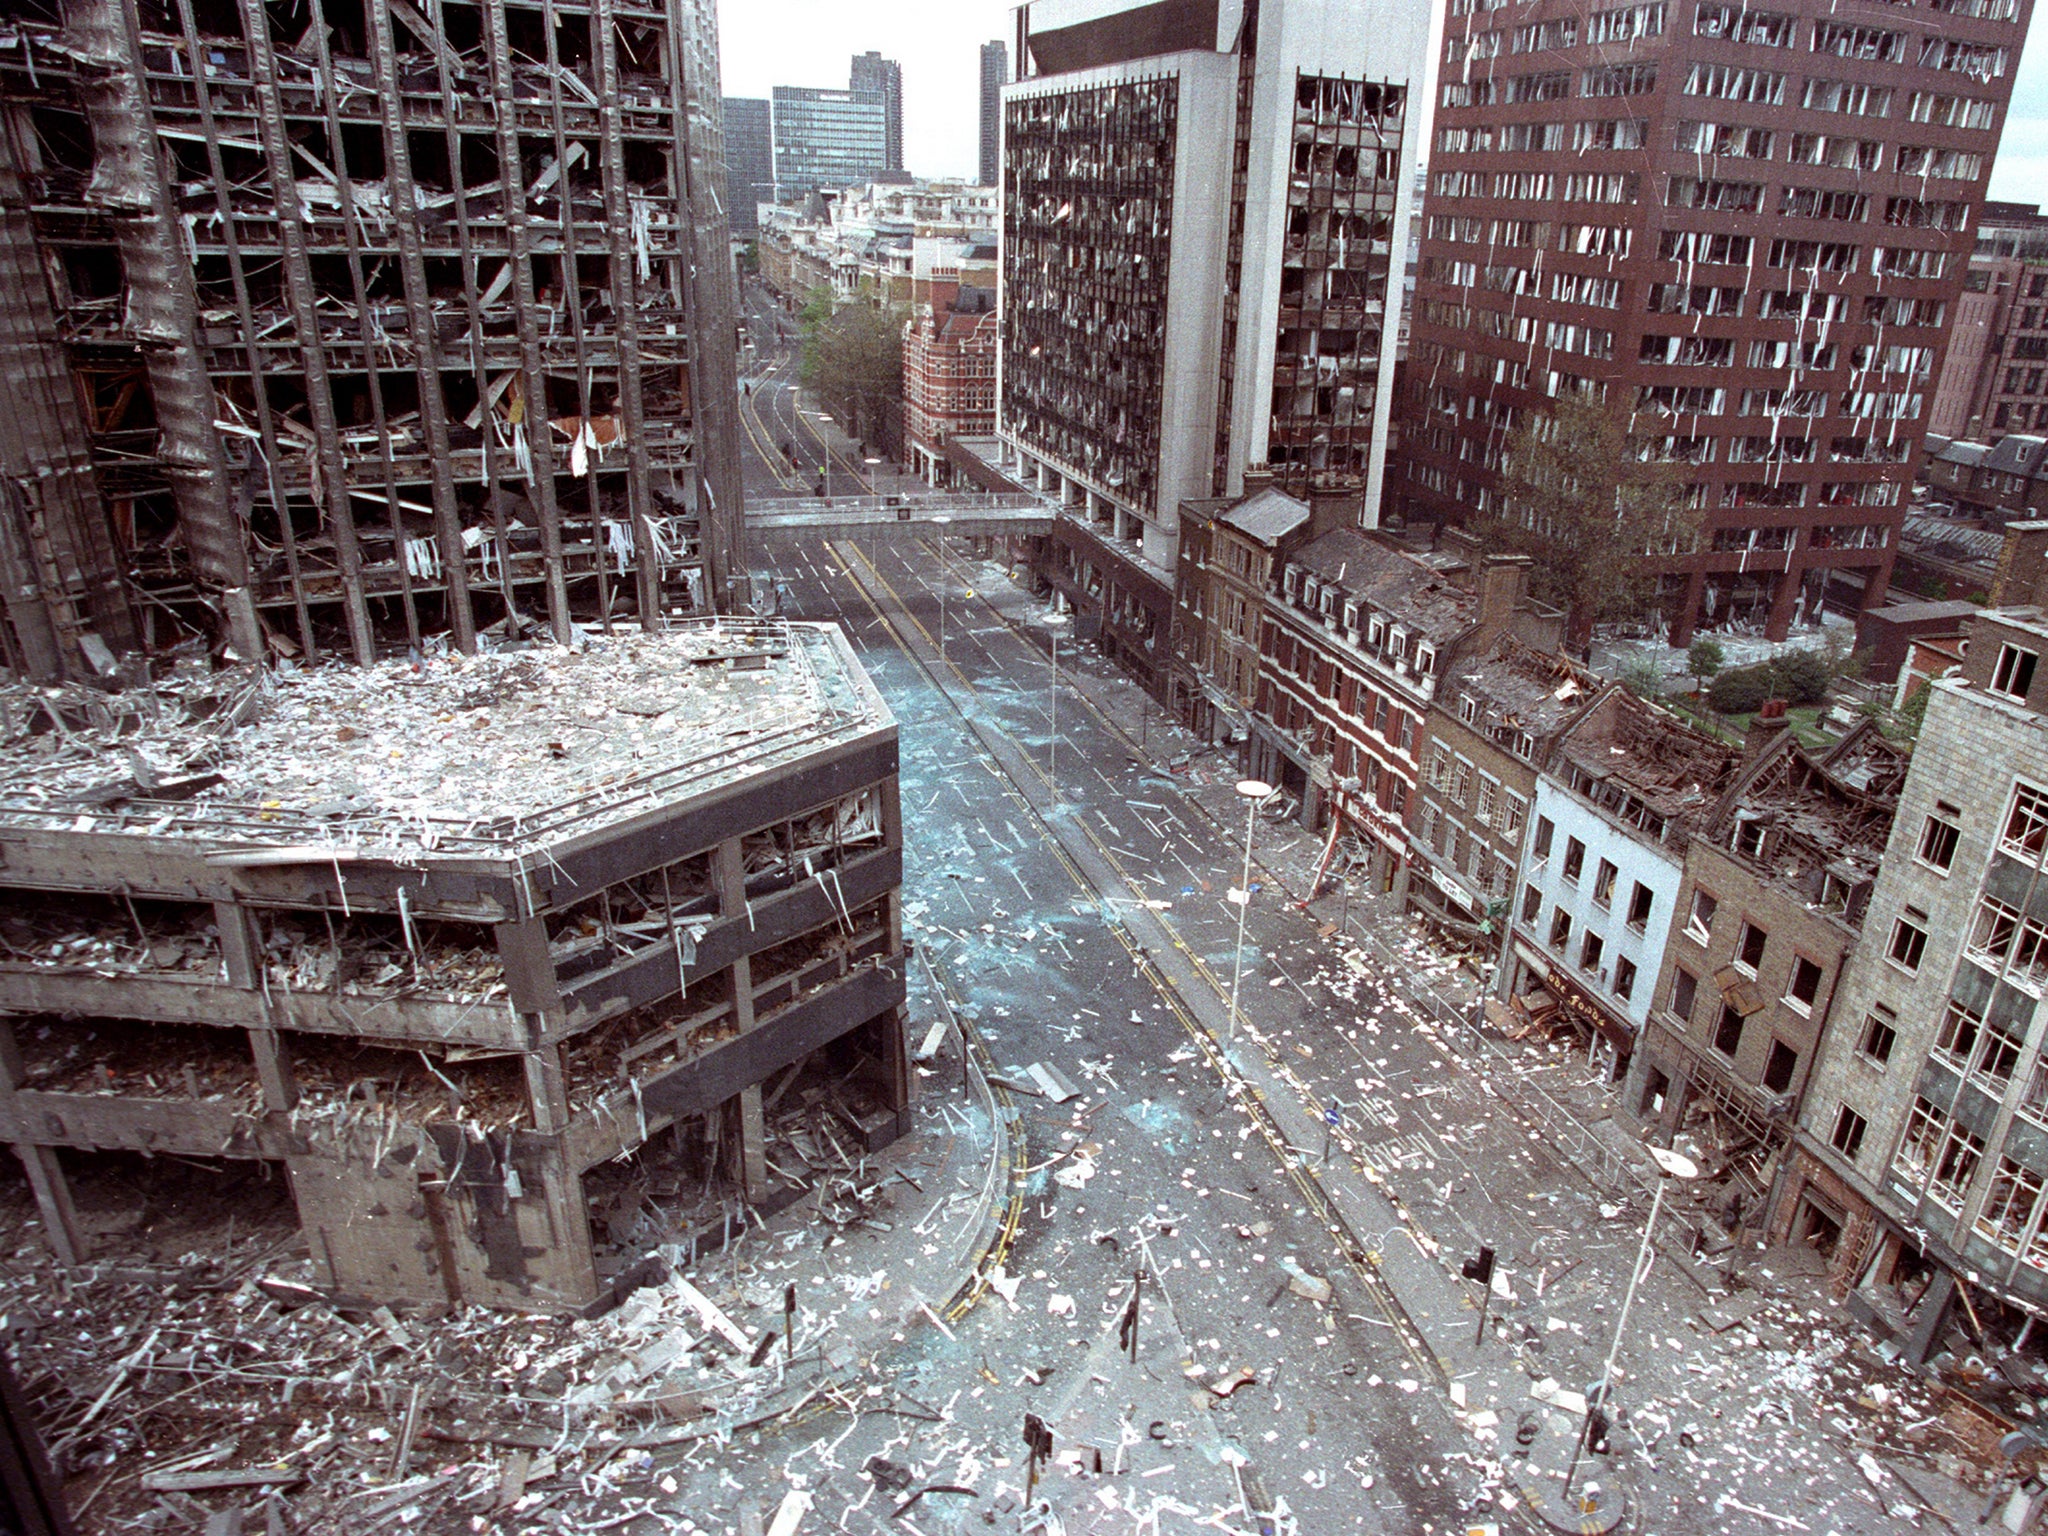 An IRA bomb in 1993 devastated the city of London